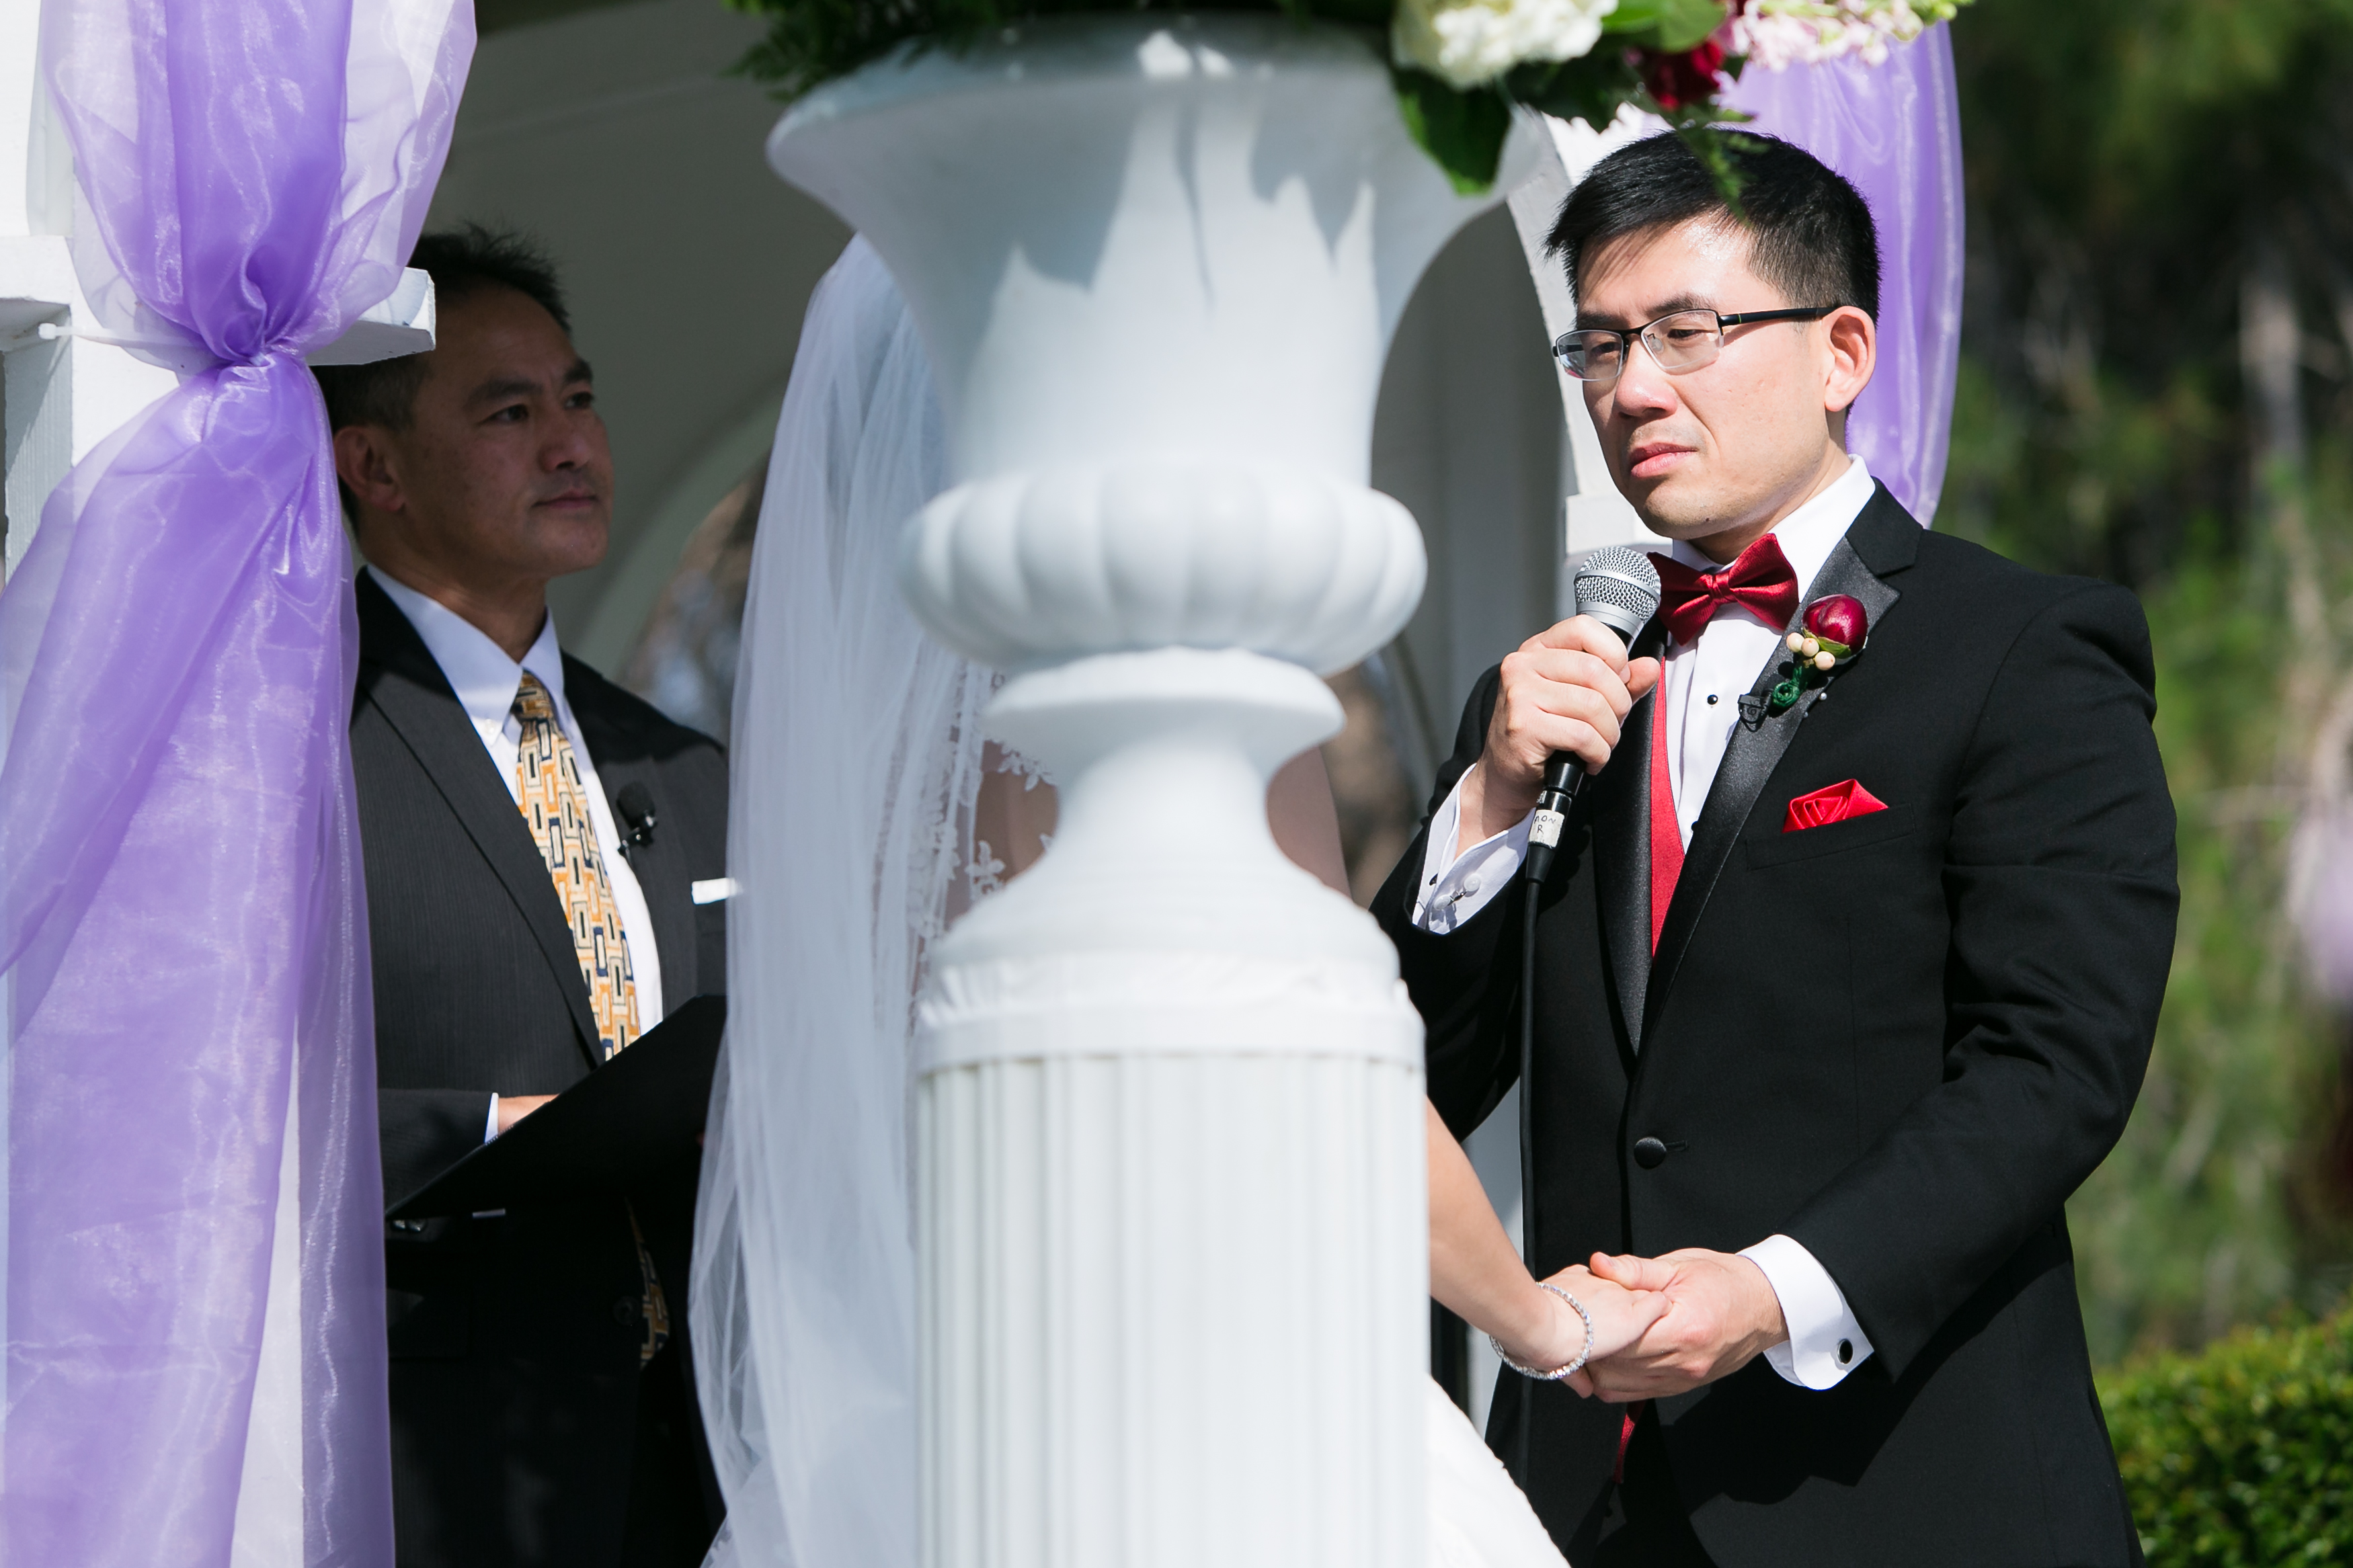 Groom reading vows to bride emotionally